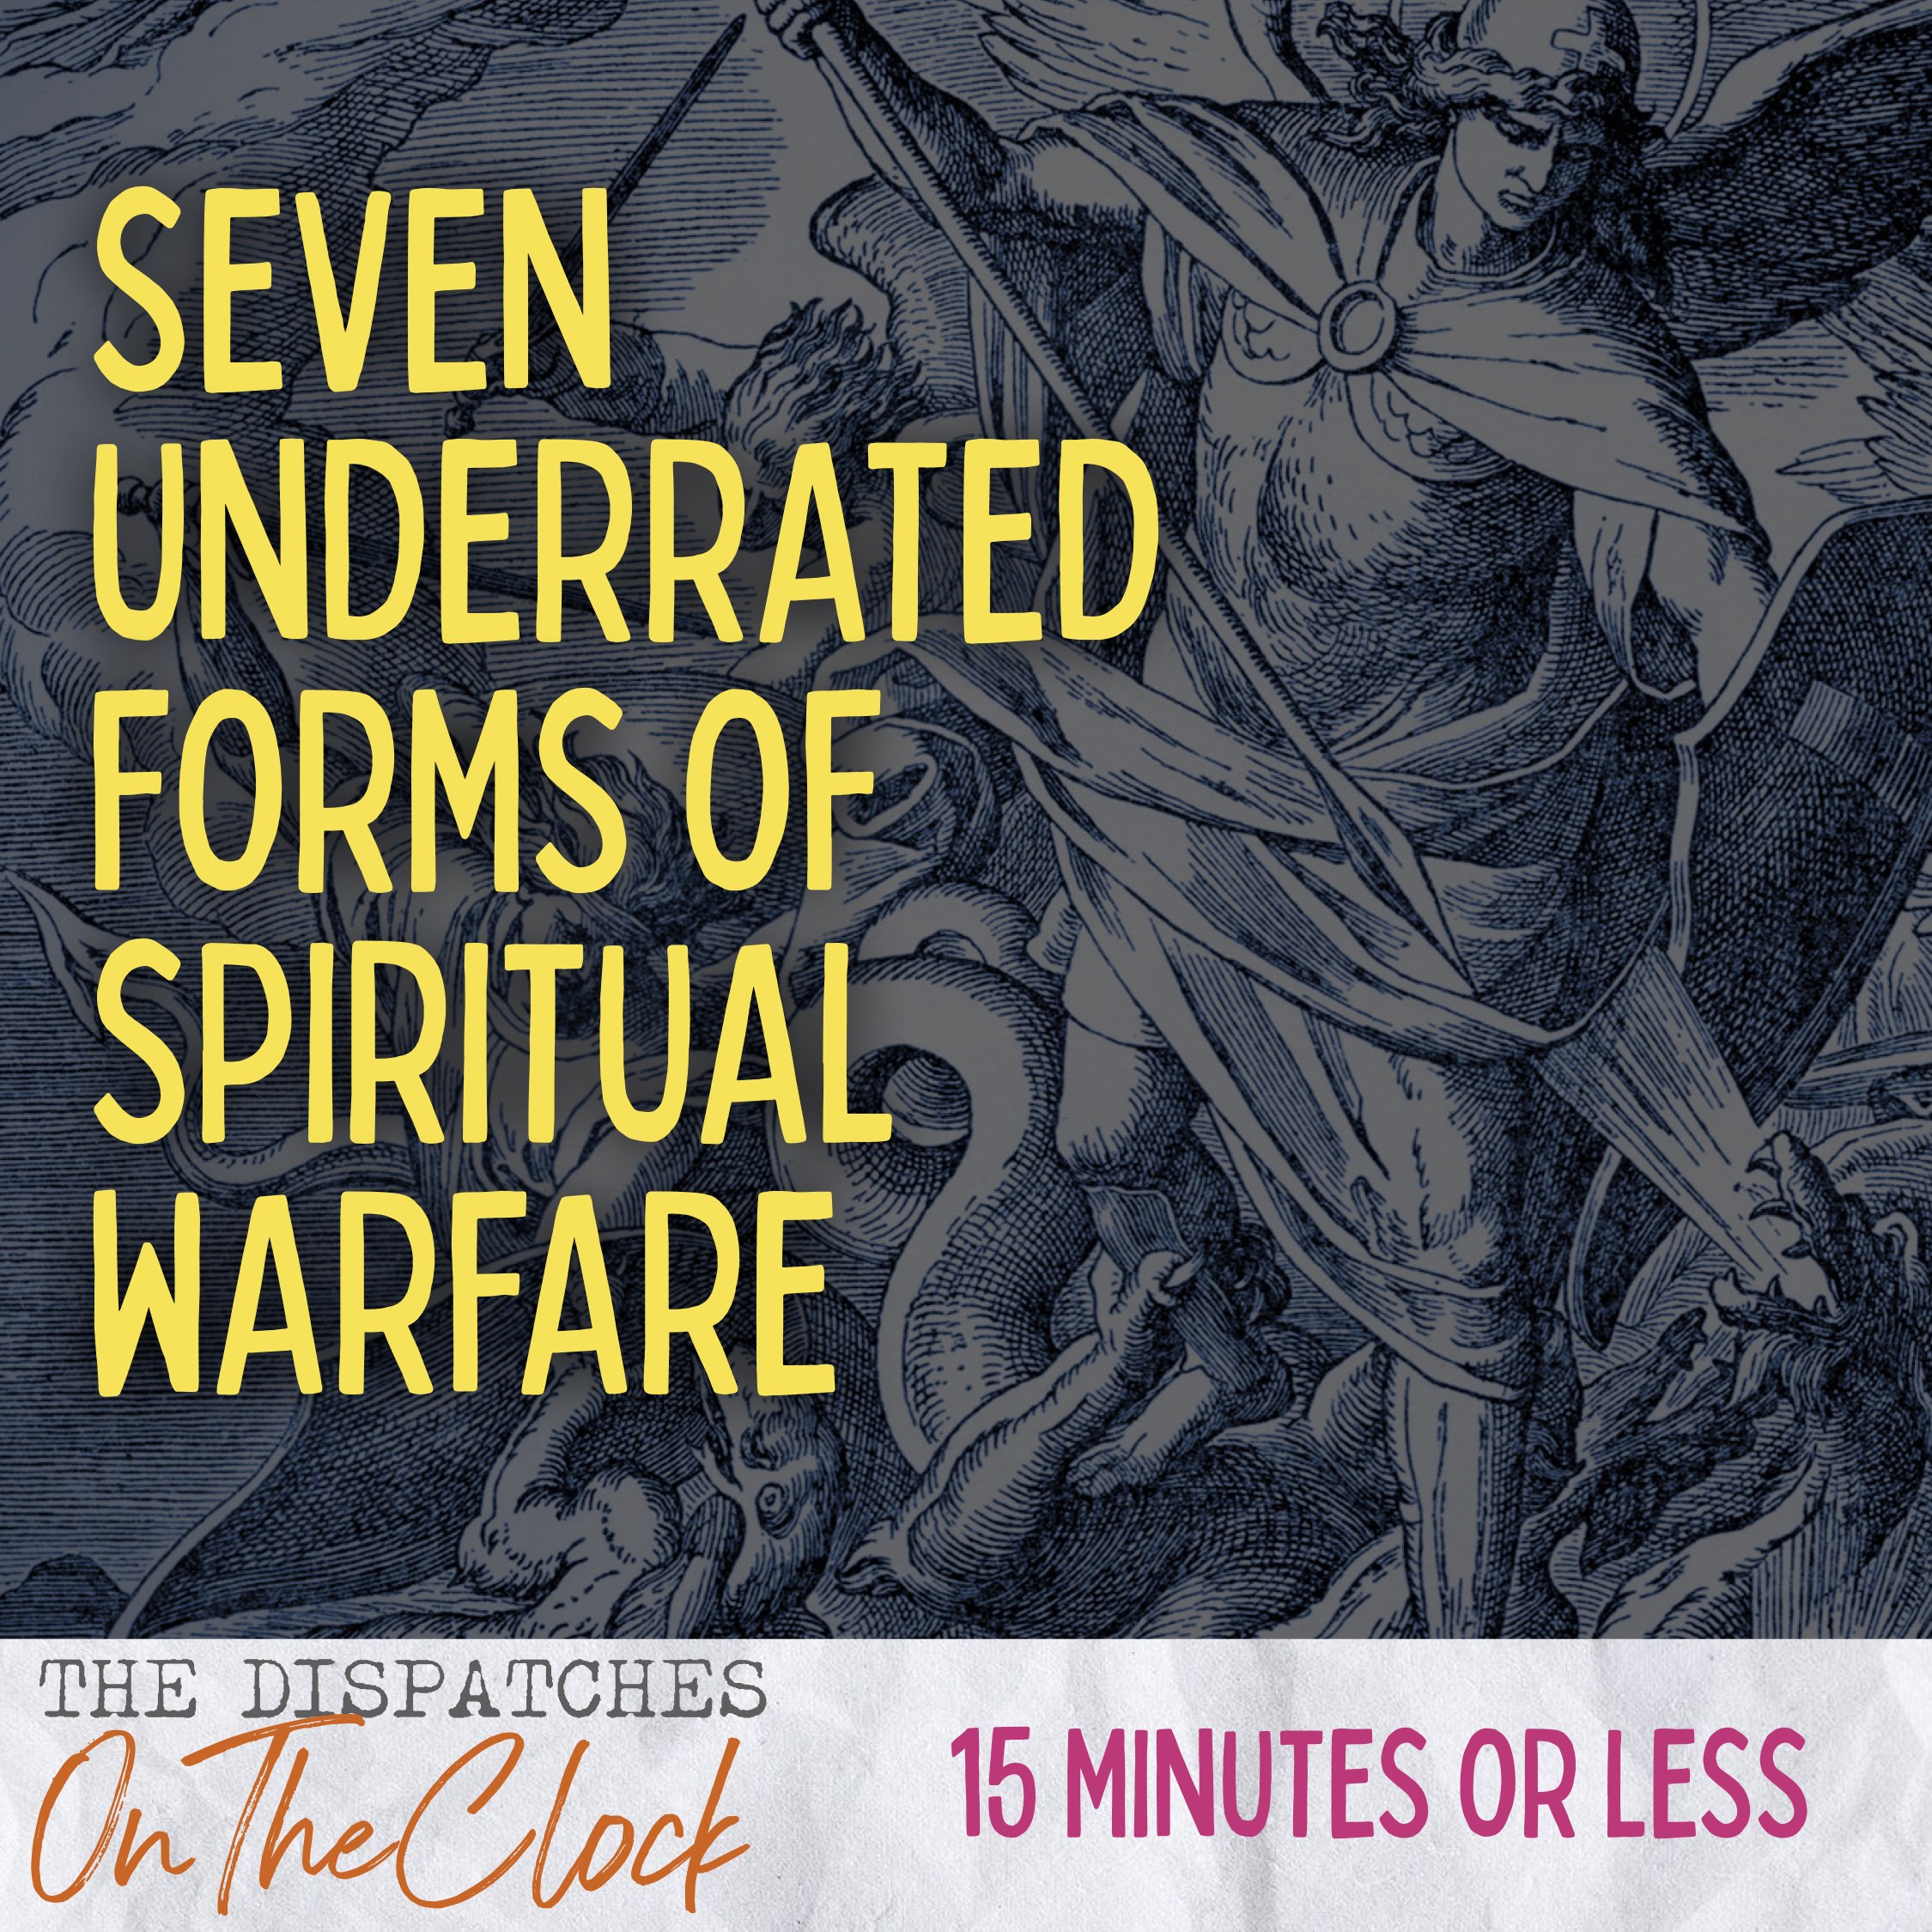 ON THE CLOCK | Seven Underrated Forms of Spiritual Warfare